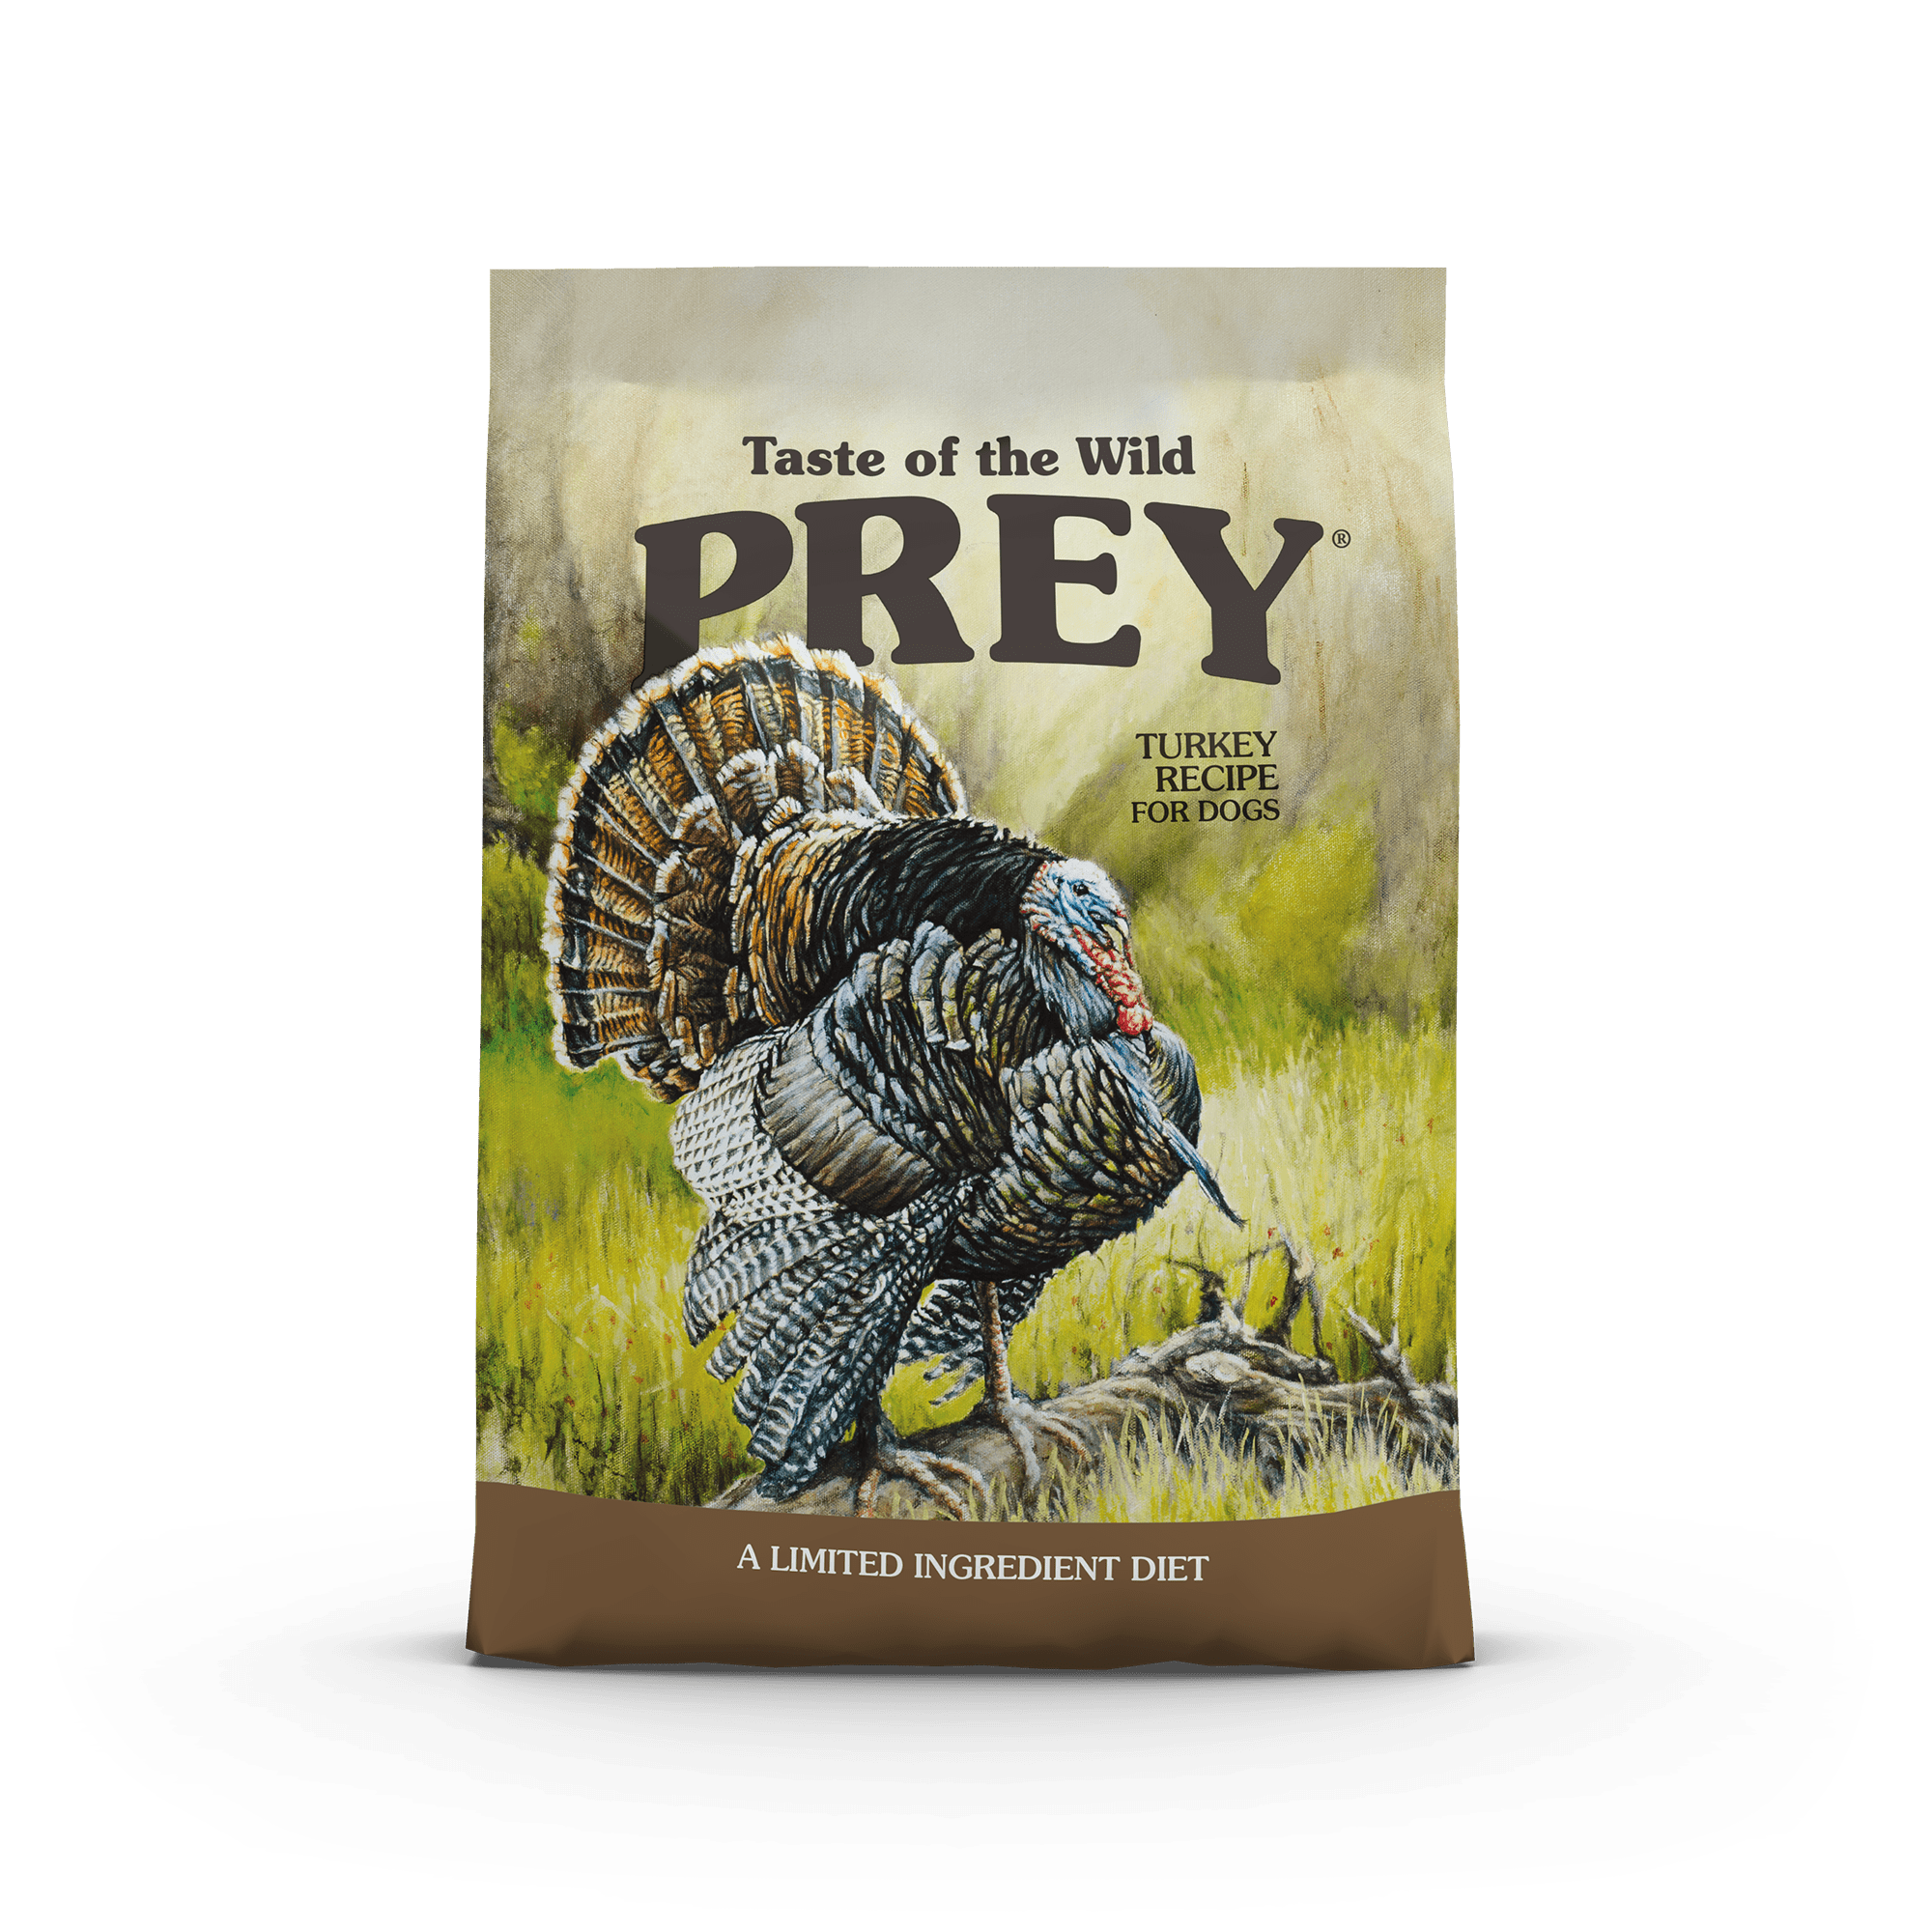 Taste of the Wild PREY Turkey Limited Ingredient Recipe for Dogs package